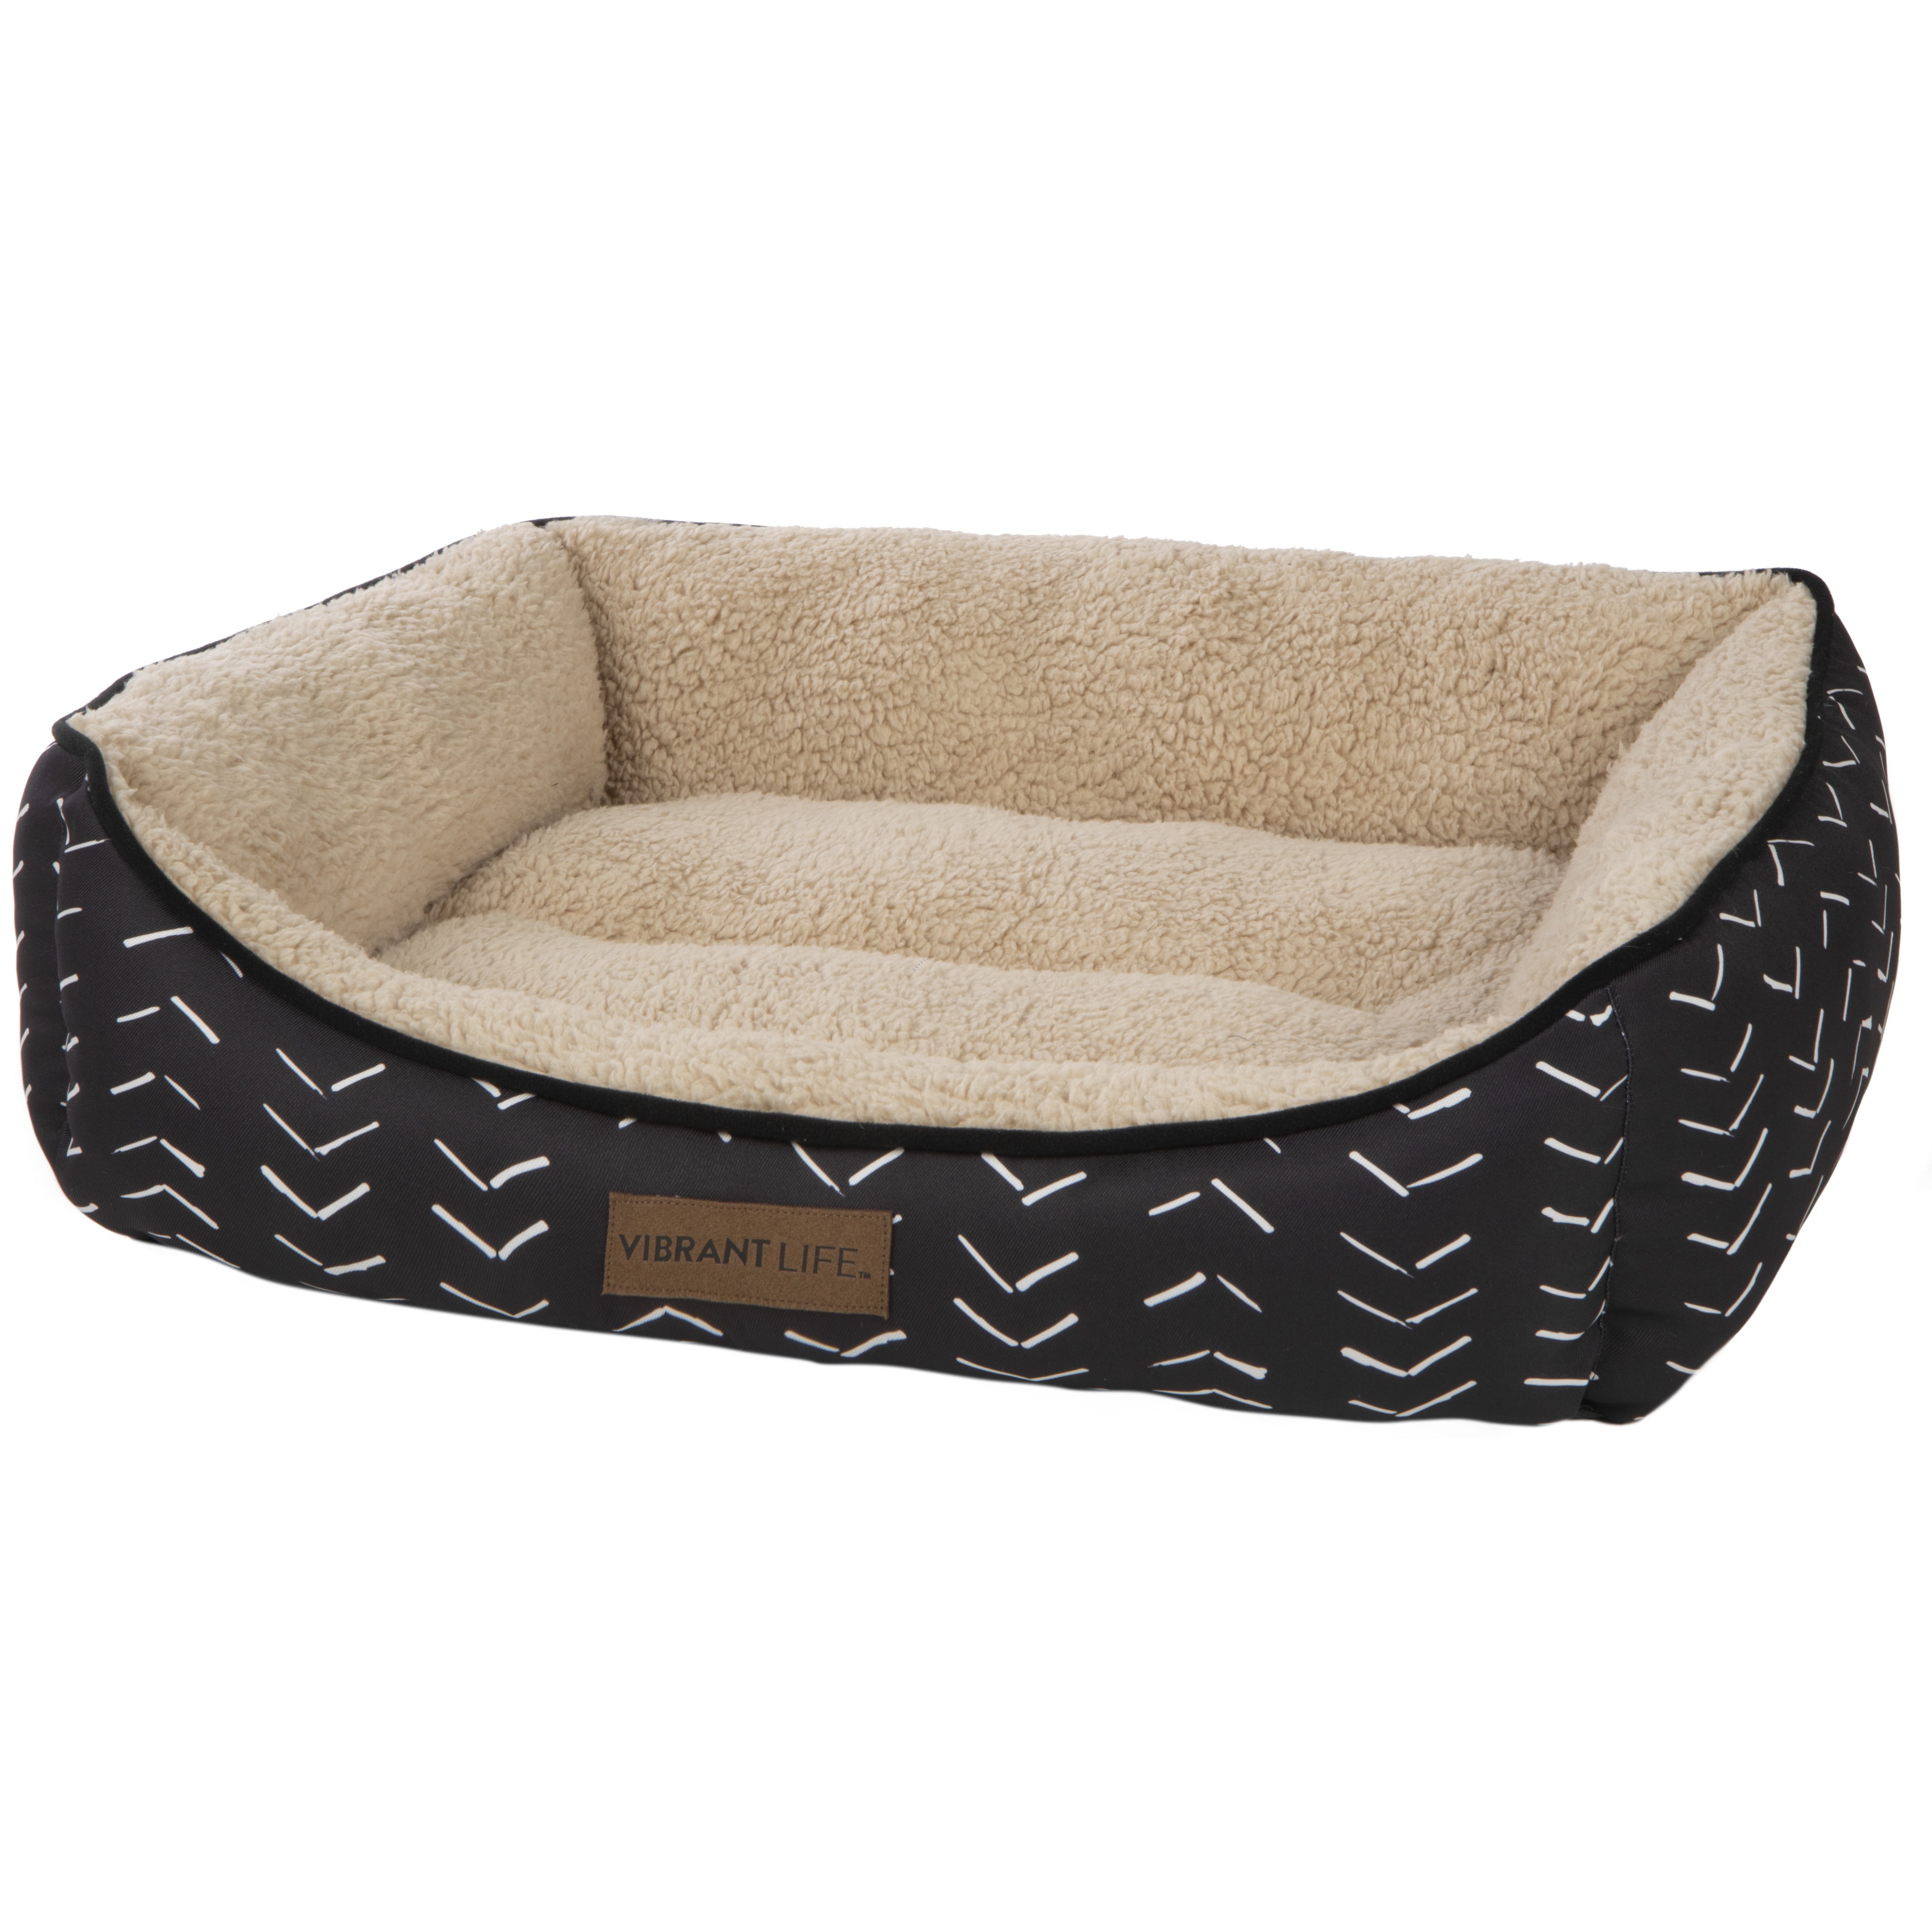 Vibrant Life Luxe Cuddler Mattress Edition Dog Bed, Medium, 27"x21", Up to 40lbs